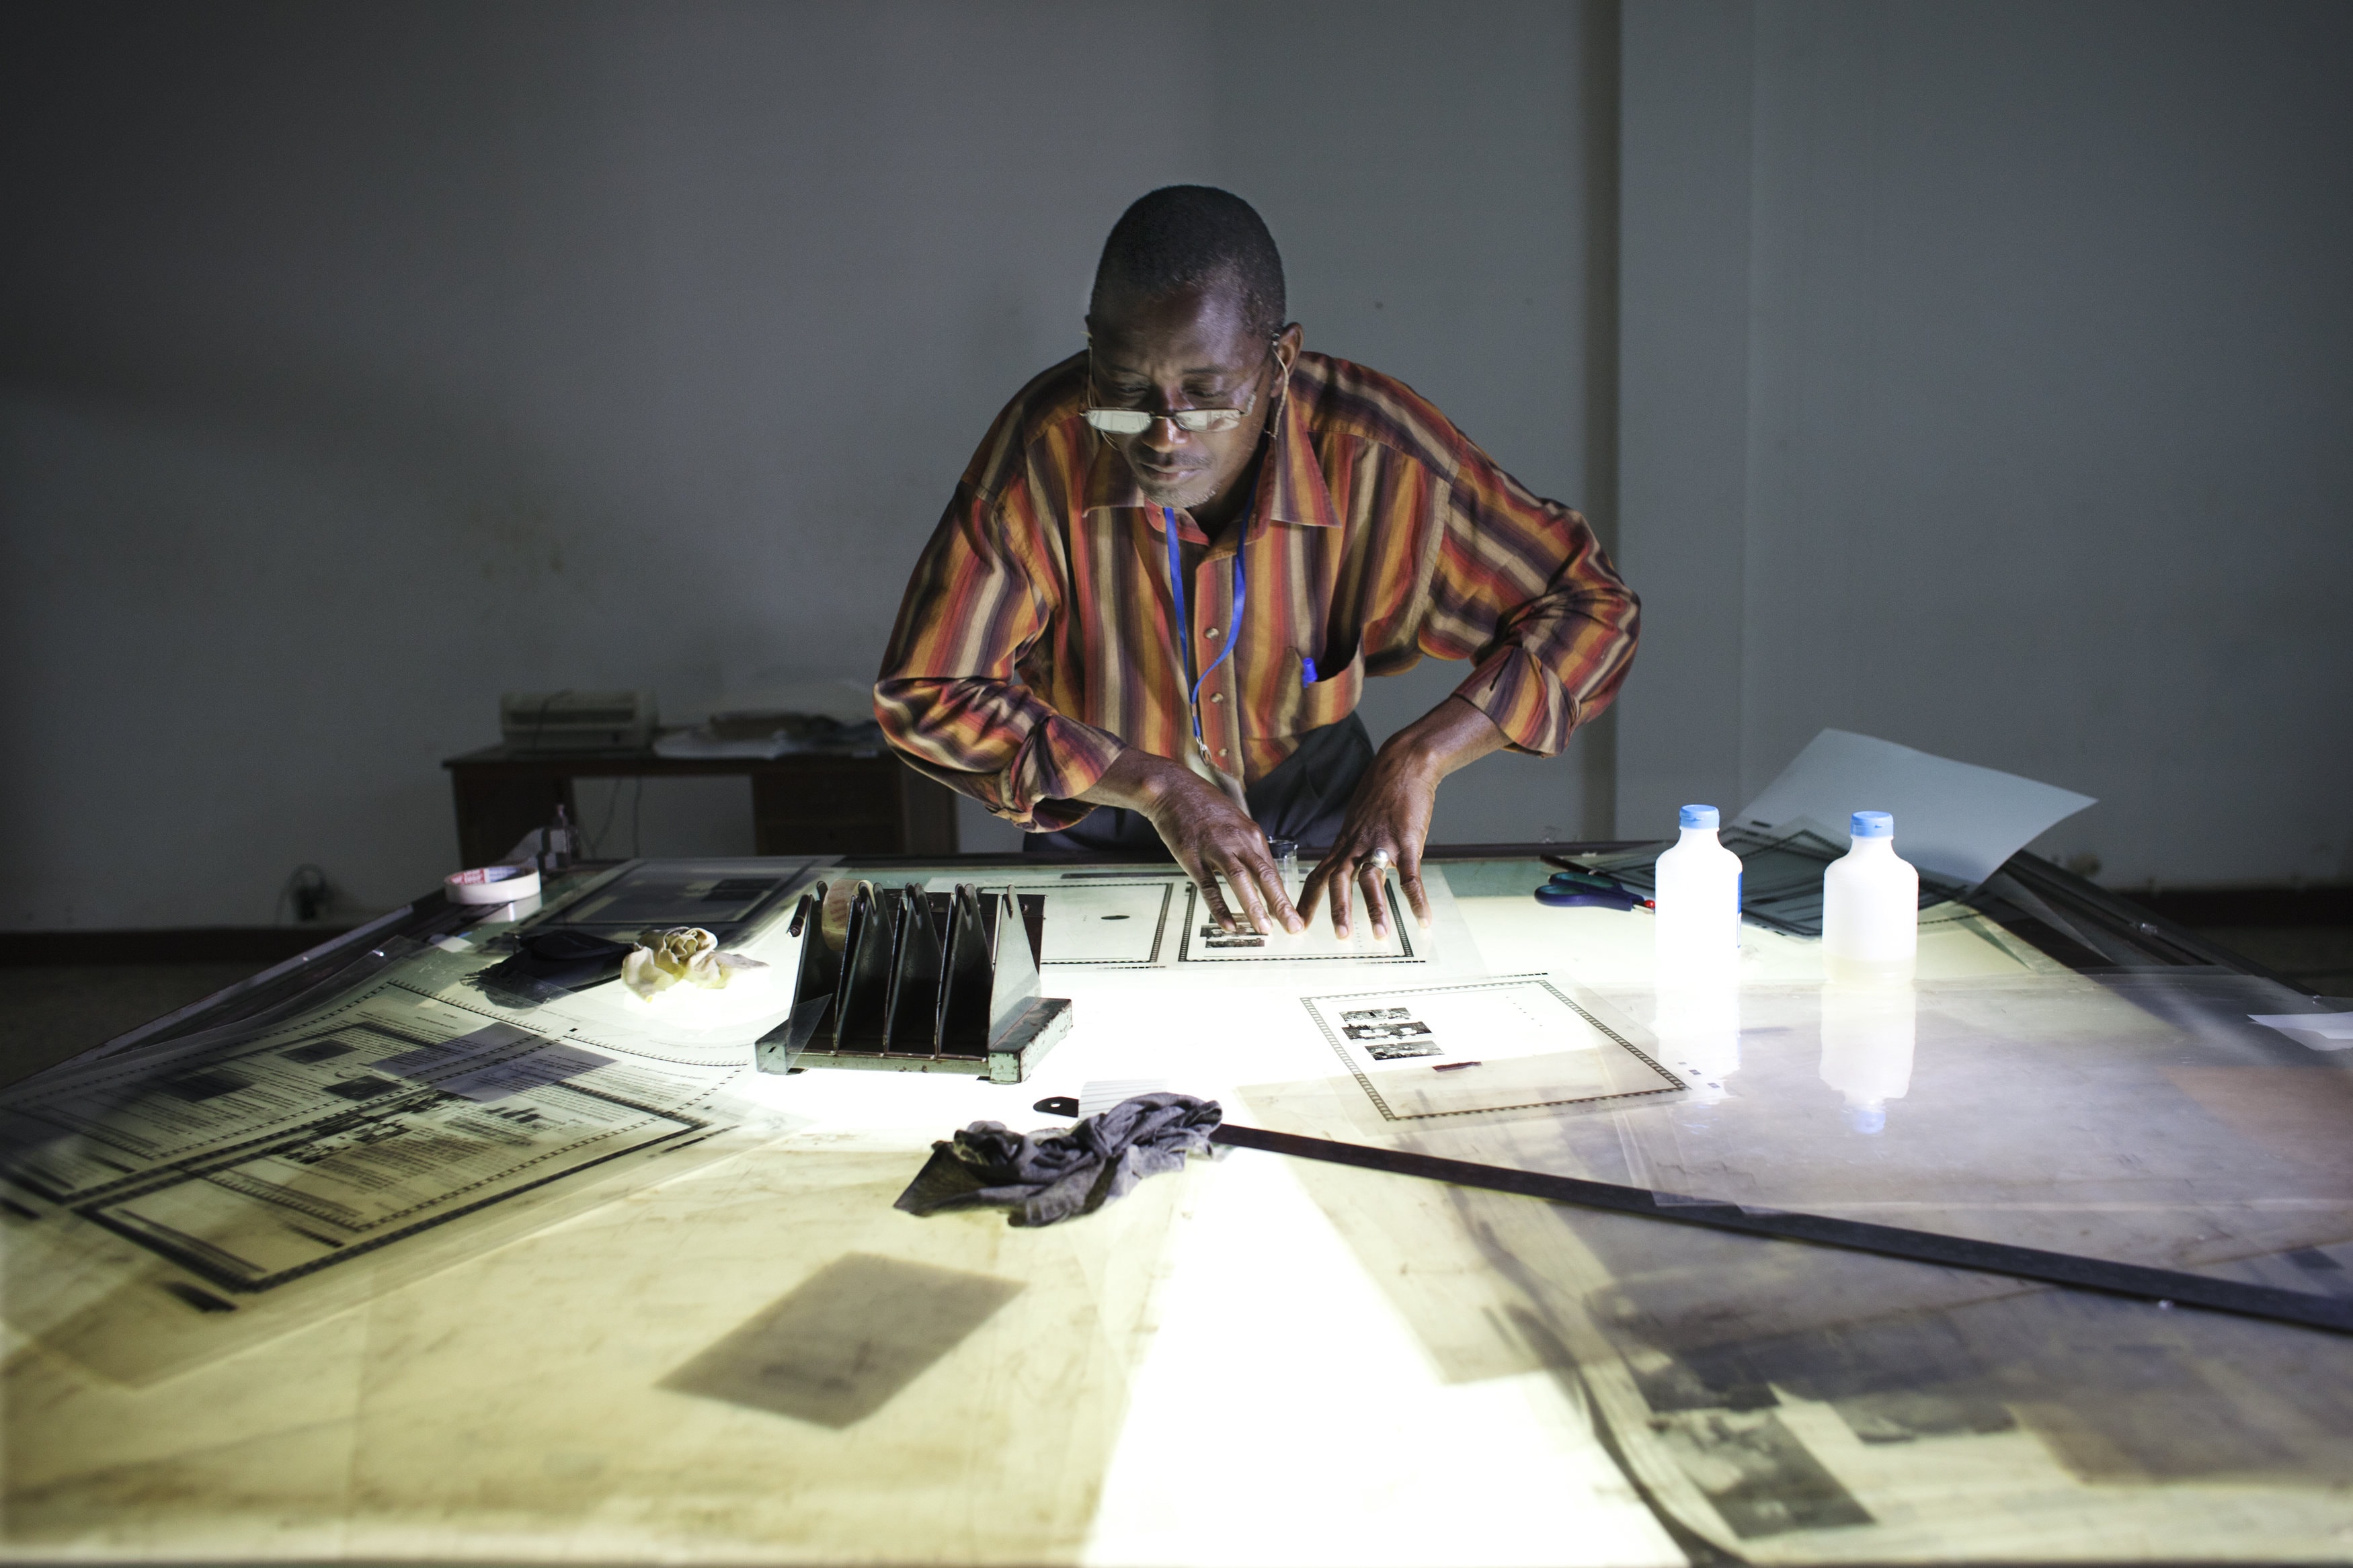 A man puts  together Guinea-Bissau's state newspaper at a printing press in the capital Bissau, 30 October 2012, REUTERS/Joe Penney